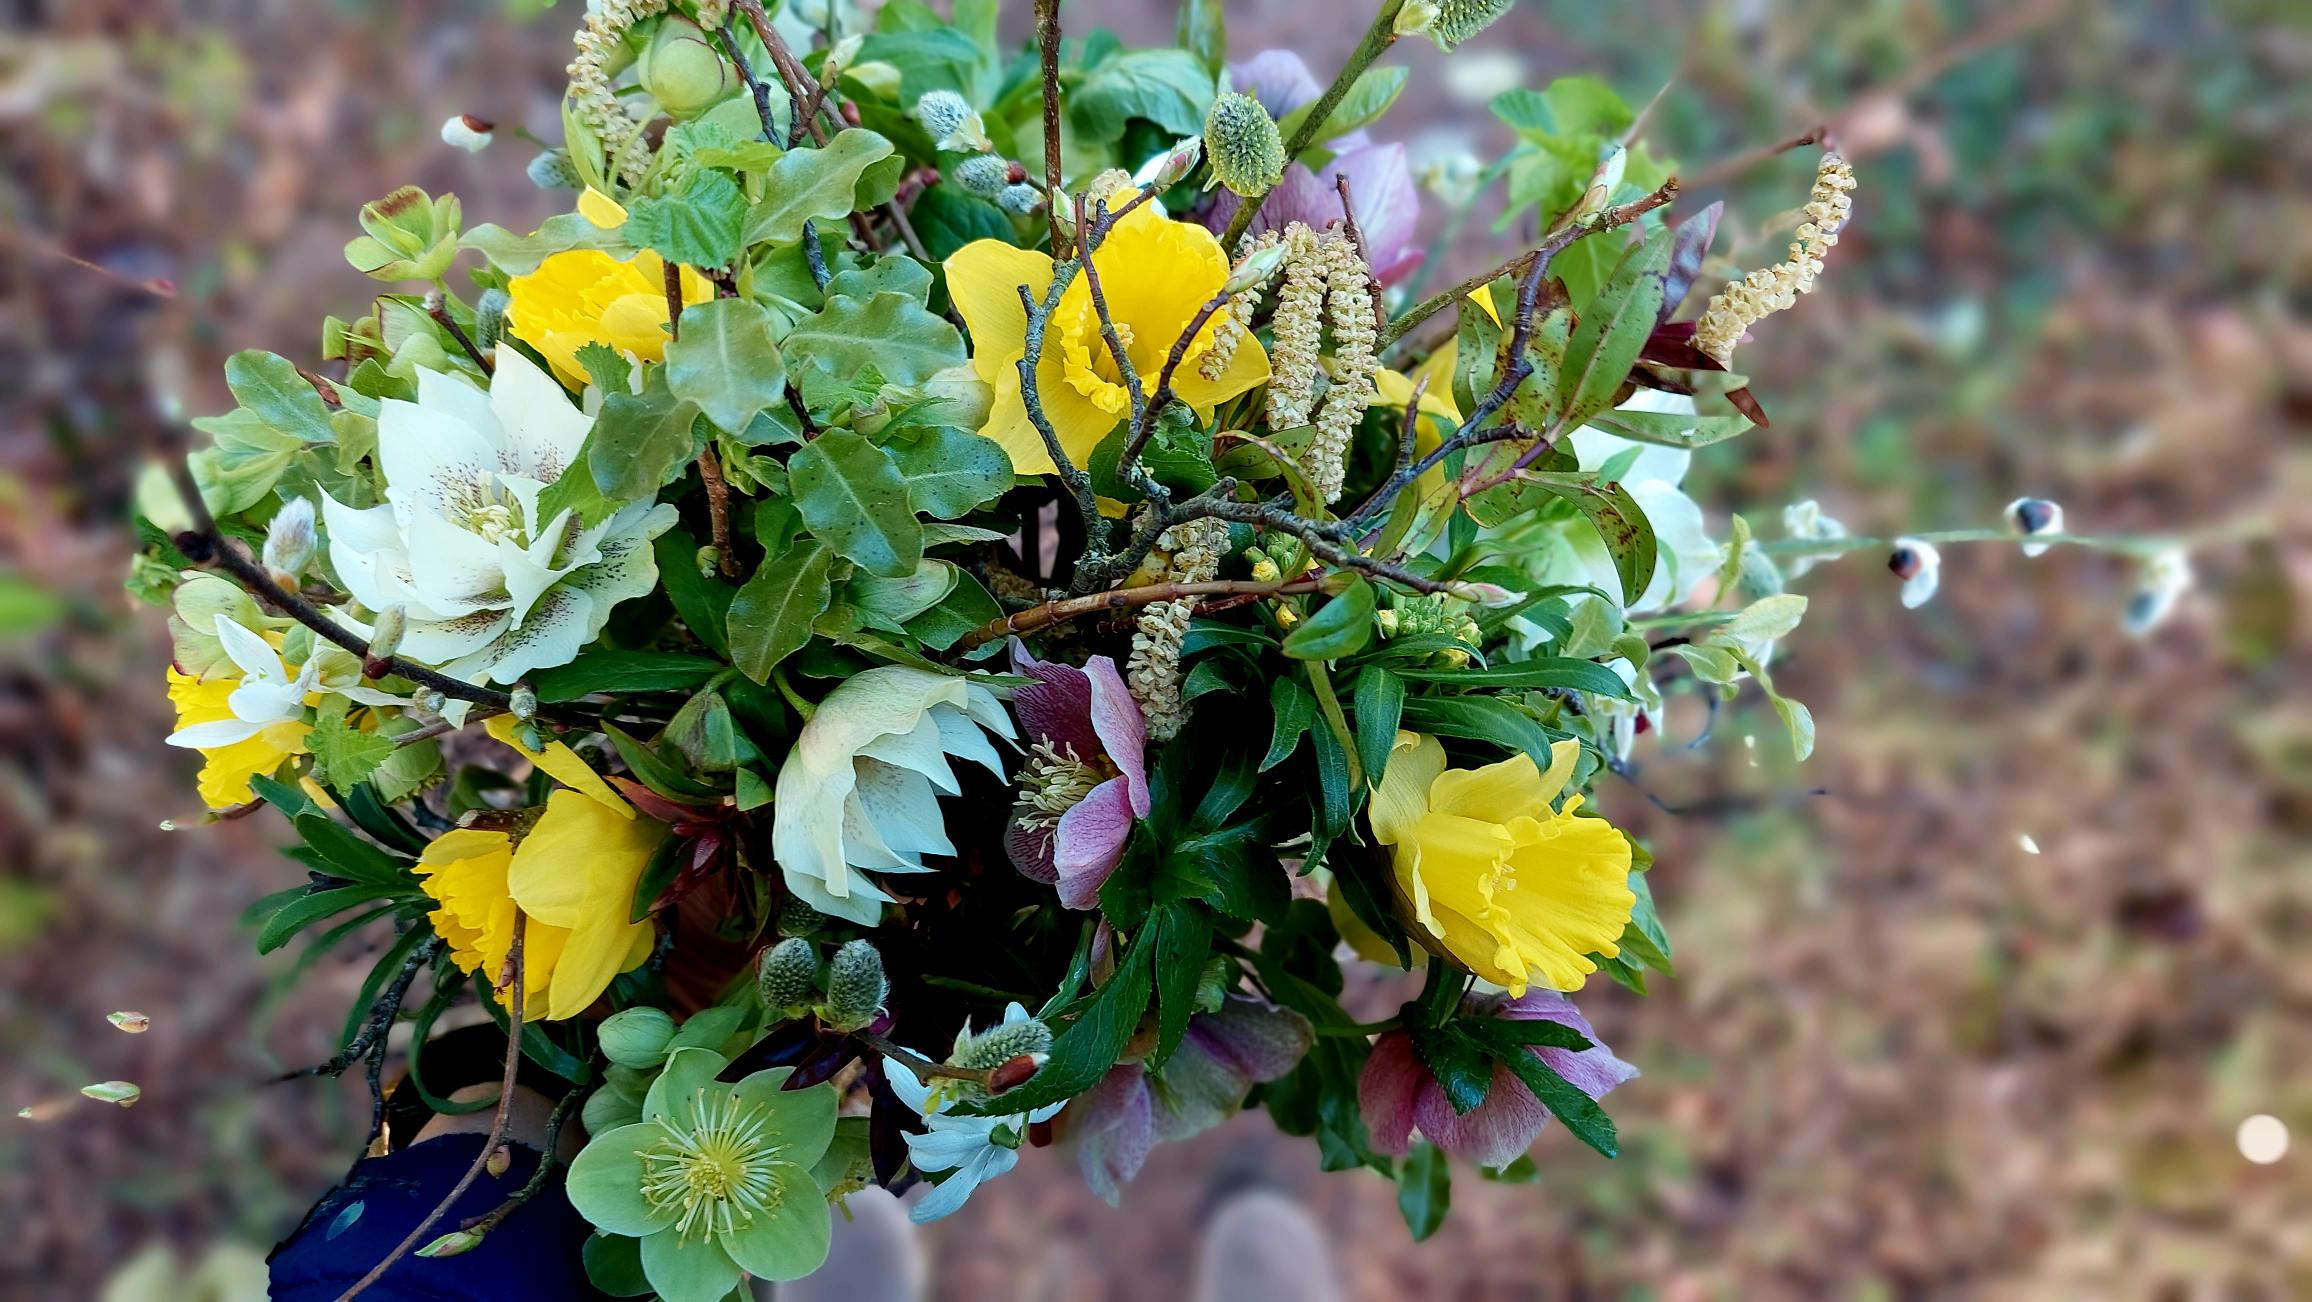 This beautiful late winter bouquet by Kathryn Hurst contains hellebores, daffodils and snowdrops, along with evergreen foliage, hazel and willow.